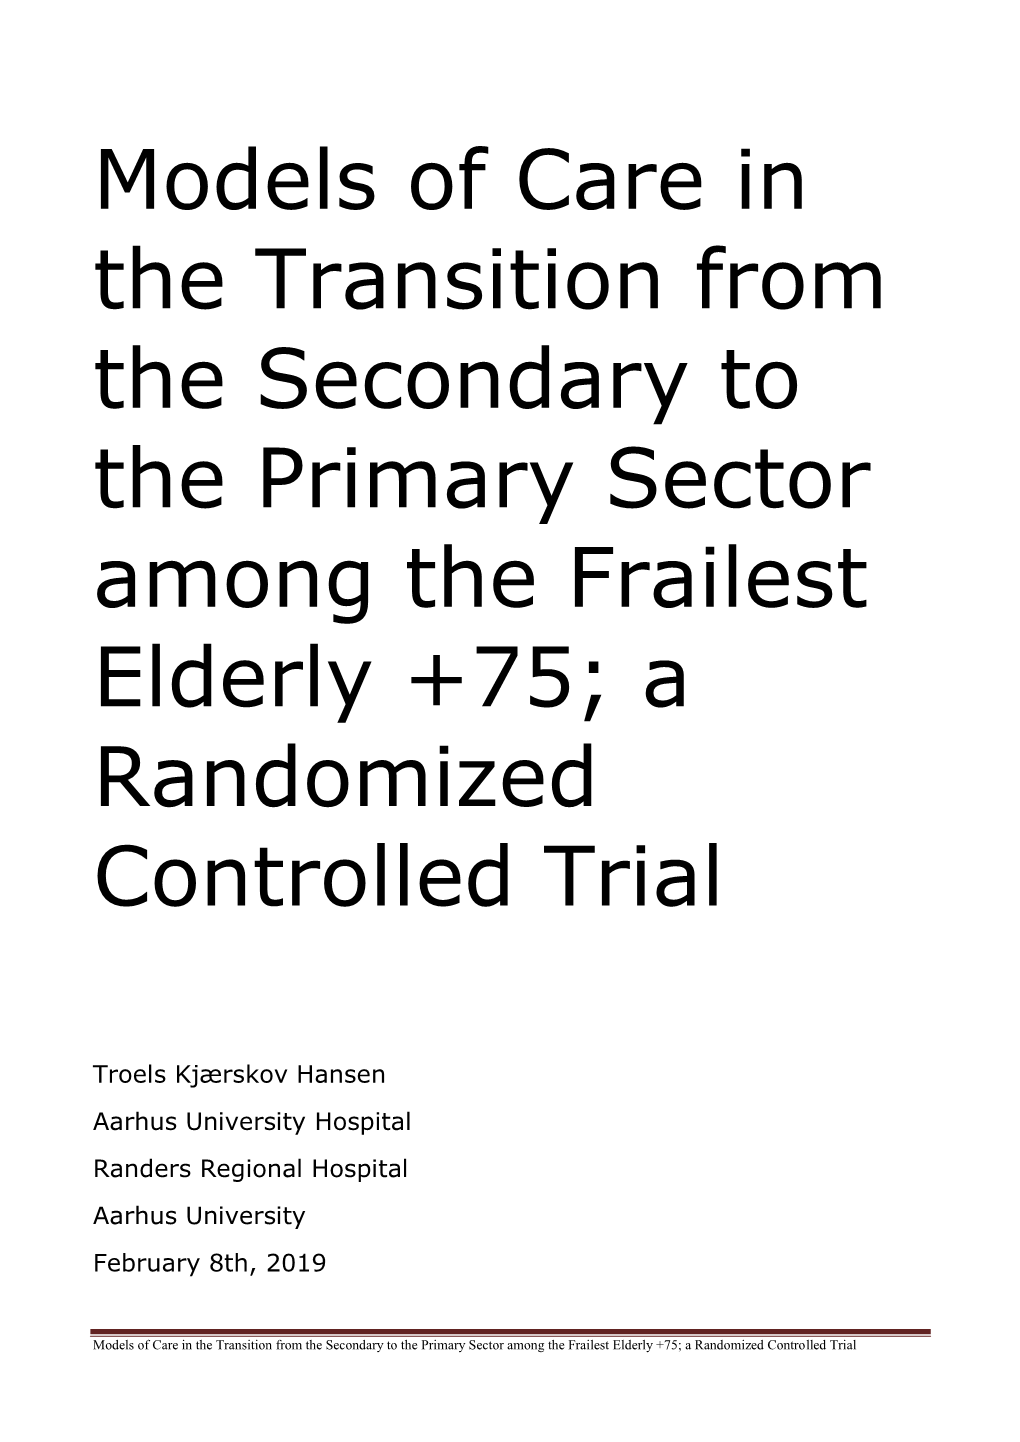 Models of Care in the Transition from the Secondary to the Primary Sector Among the Frailest Elderly +75; a Randomized